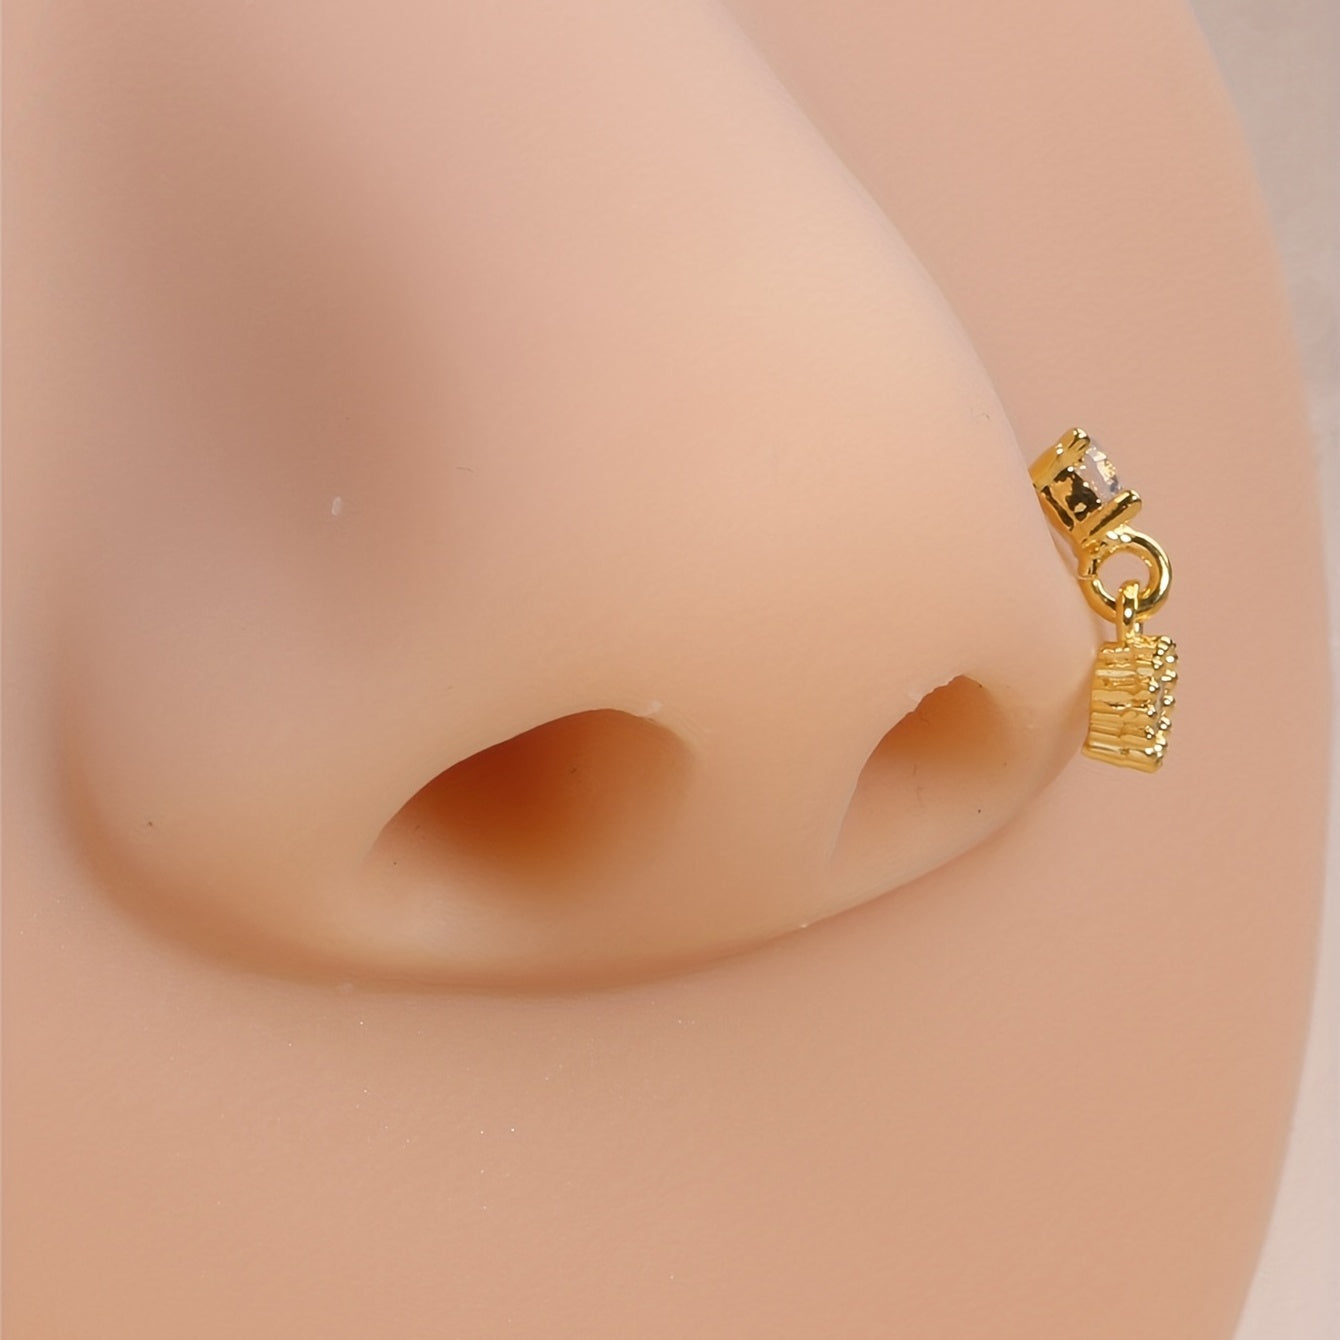 Add a Unique Touch to Your Look with our Dangle Nose Ring Inlaid with Round Cut Shiny Zircon - Perfect for Body Piercing Jewelry!